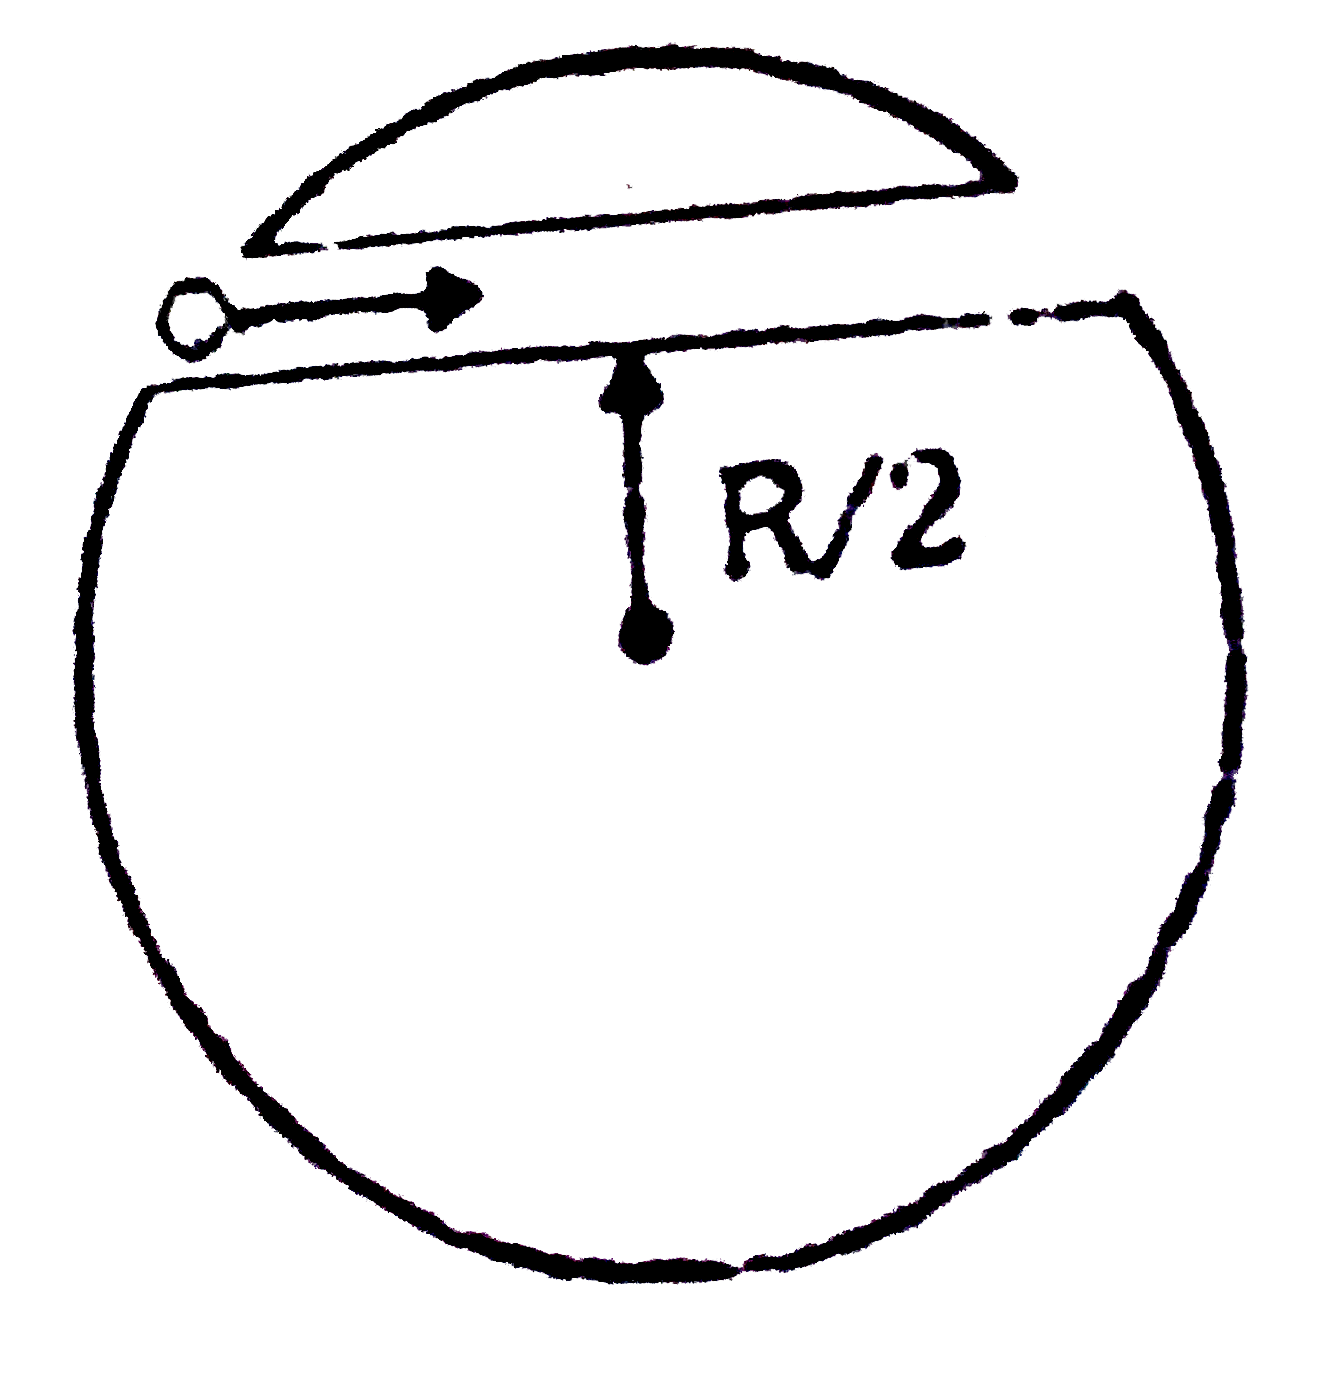 A unit positive point charge of mass m is projected with a velocity v inside the tummel as shown. The tunnel has been made inside a uniformly charged non conducting sphere. The minimum velocity with which the point charge should be projected such that it can it reach the opposite end of the tunnel, is equal to: